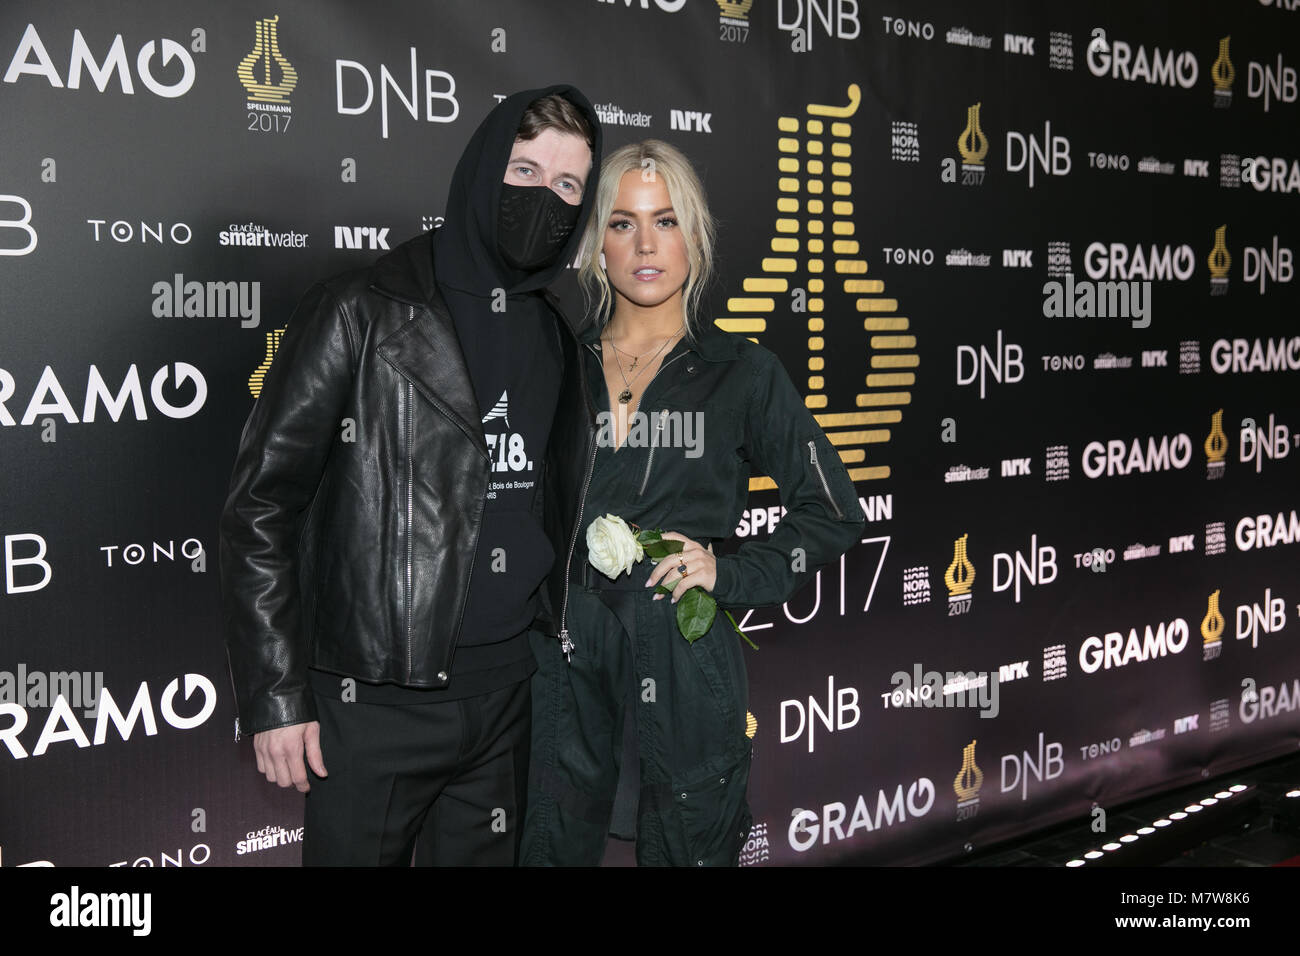 Norway, Oslo - February 25, 2018. The Norwegian record producer Alan Walker and singer Julie Bergan are seen at the red carpet at the Norwegian Grammy Awards, Spellemannprisen 2017, in Oslo. (Photo credit: Gonzales Photo - Stian S. Moller). Stock Photo